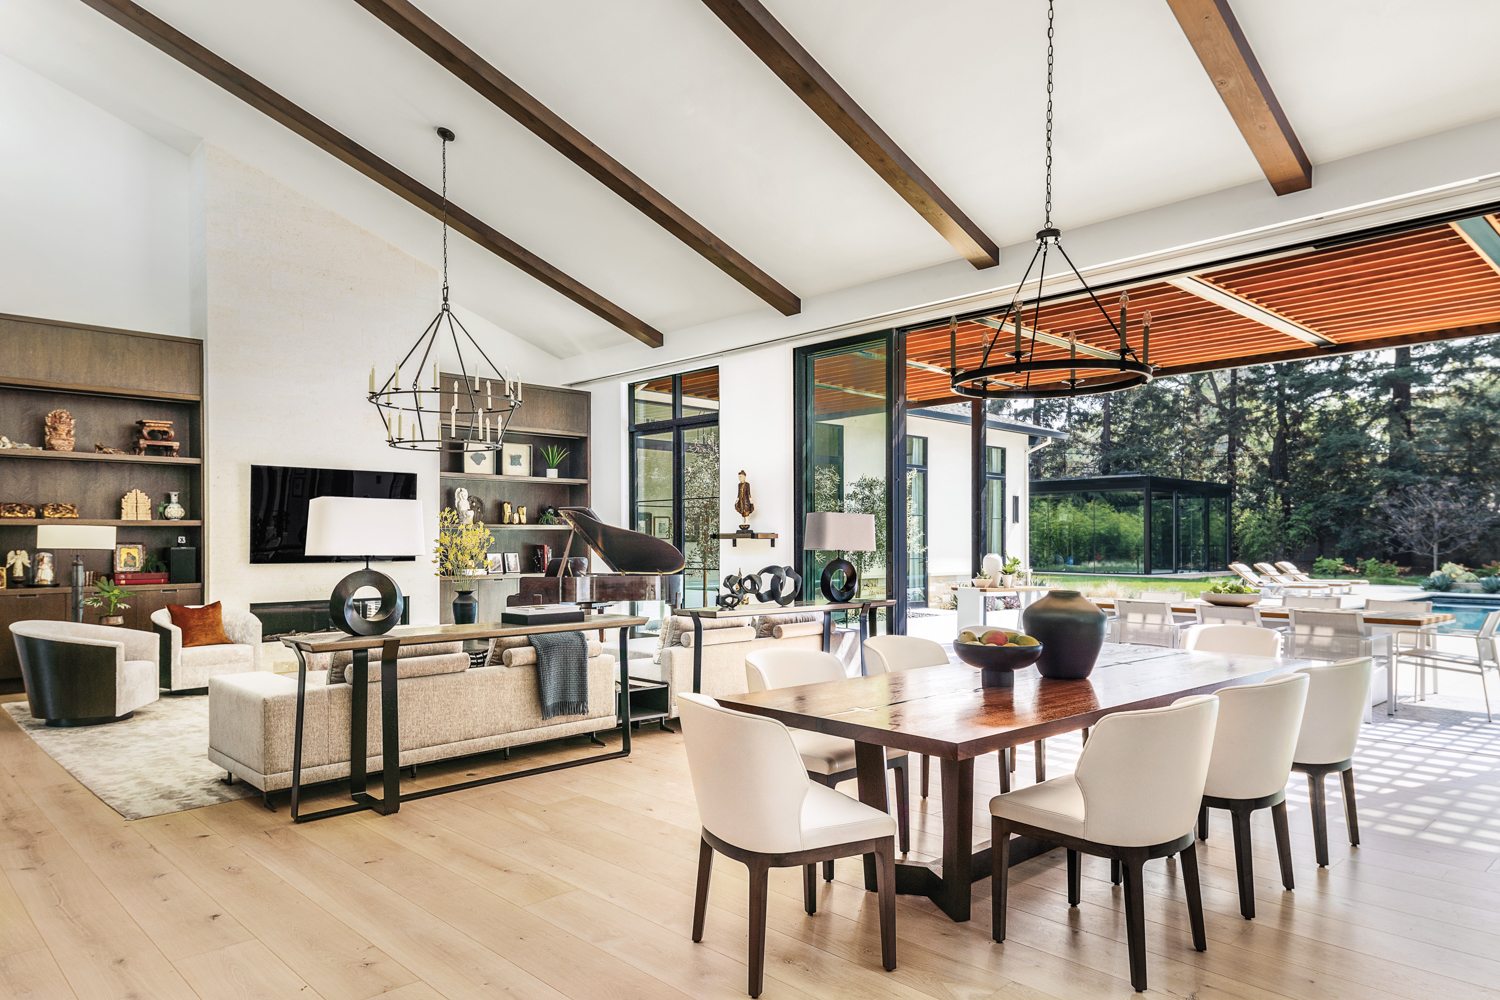 From A Humble 1950s Ranch House To An Elegant Spanish-Inspired Gem